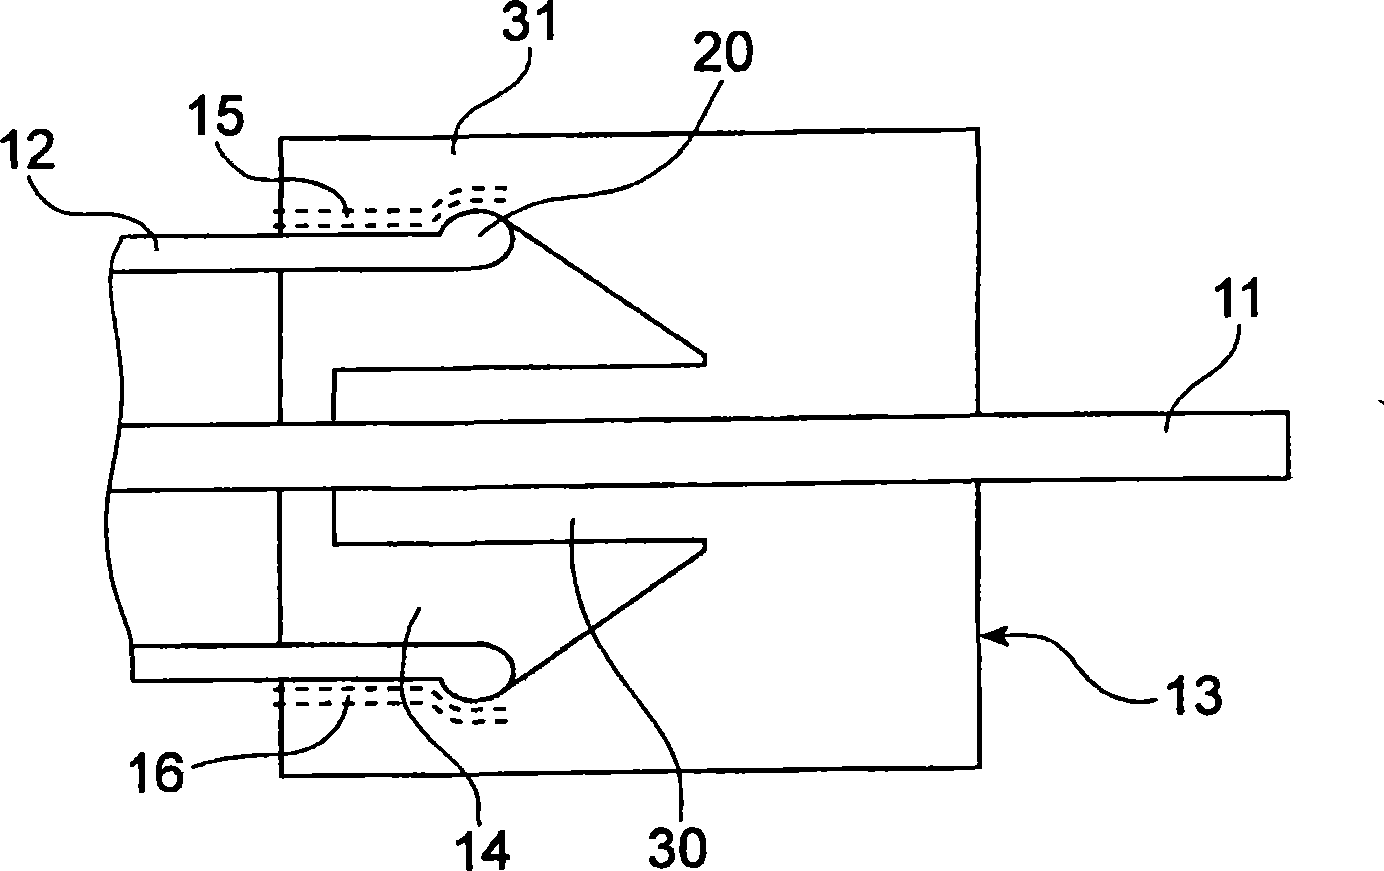 Device for controlling a high electrical field in an insulating synthetic material